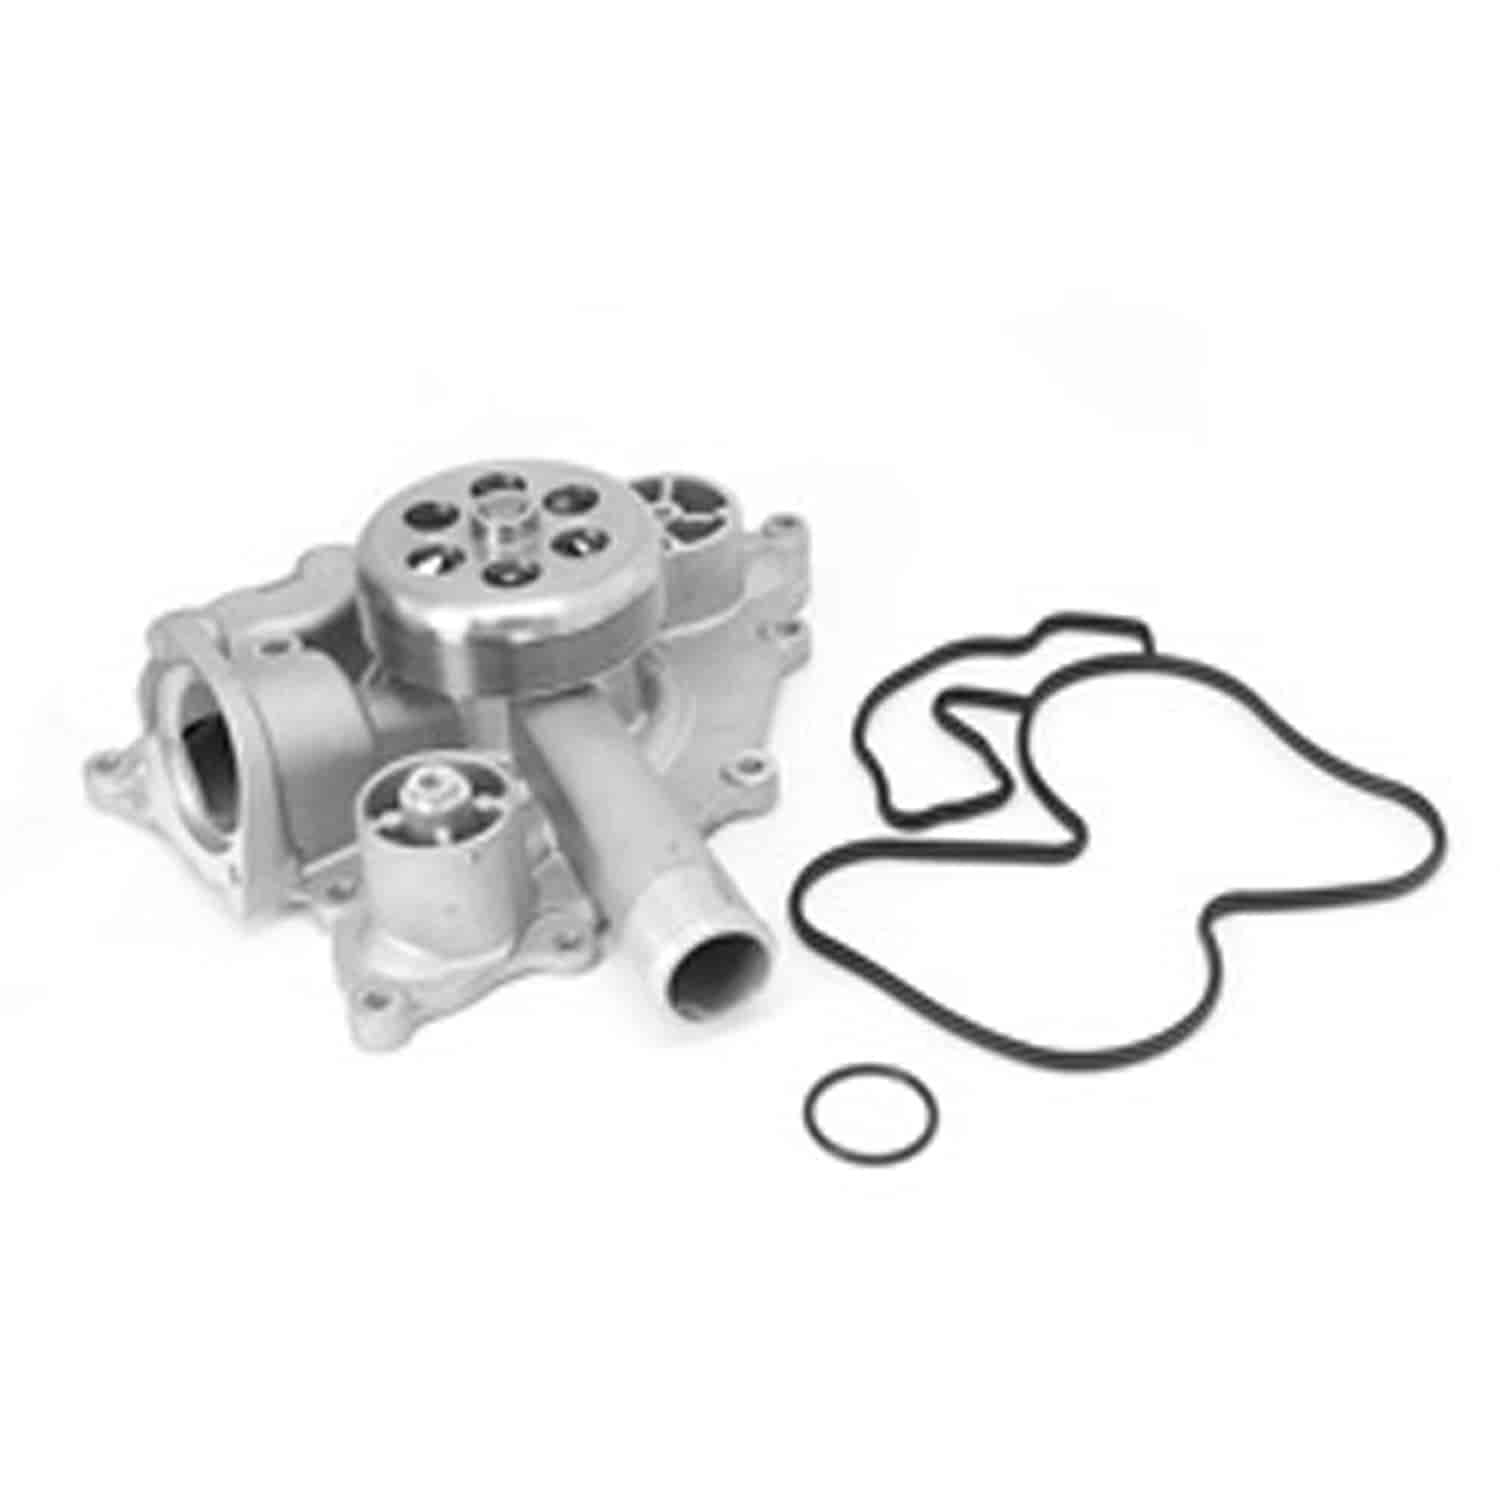 Replacement water pump from Omix-ADA, Fits 05-08 Jeep Grand Cherokees with a 5.7 liter engine an